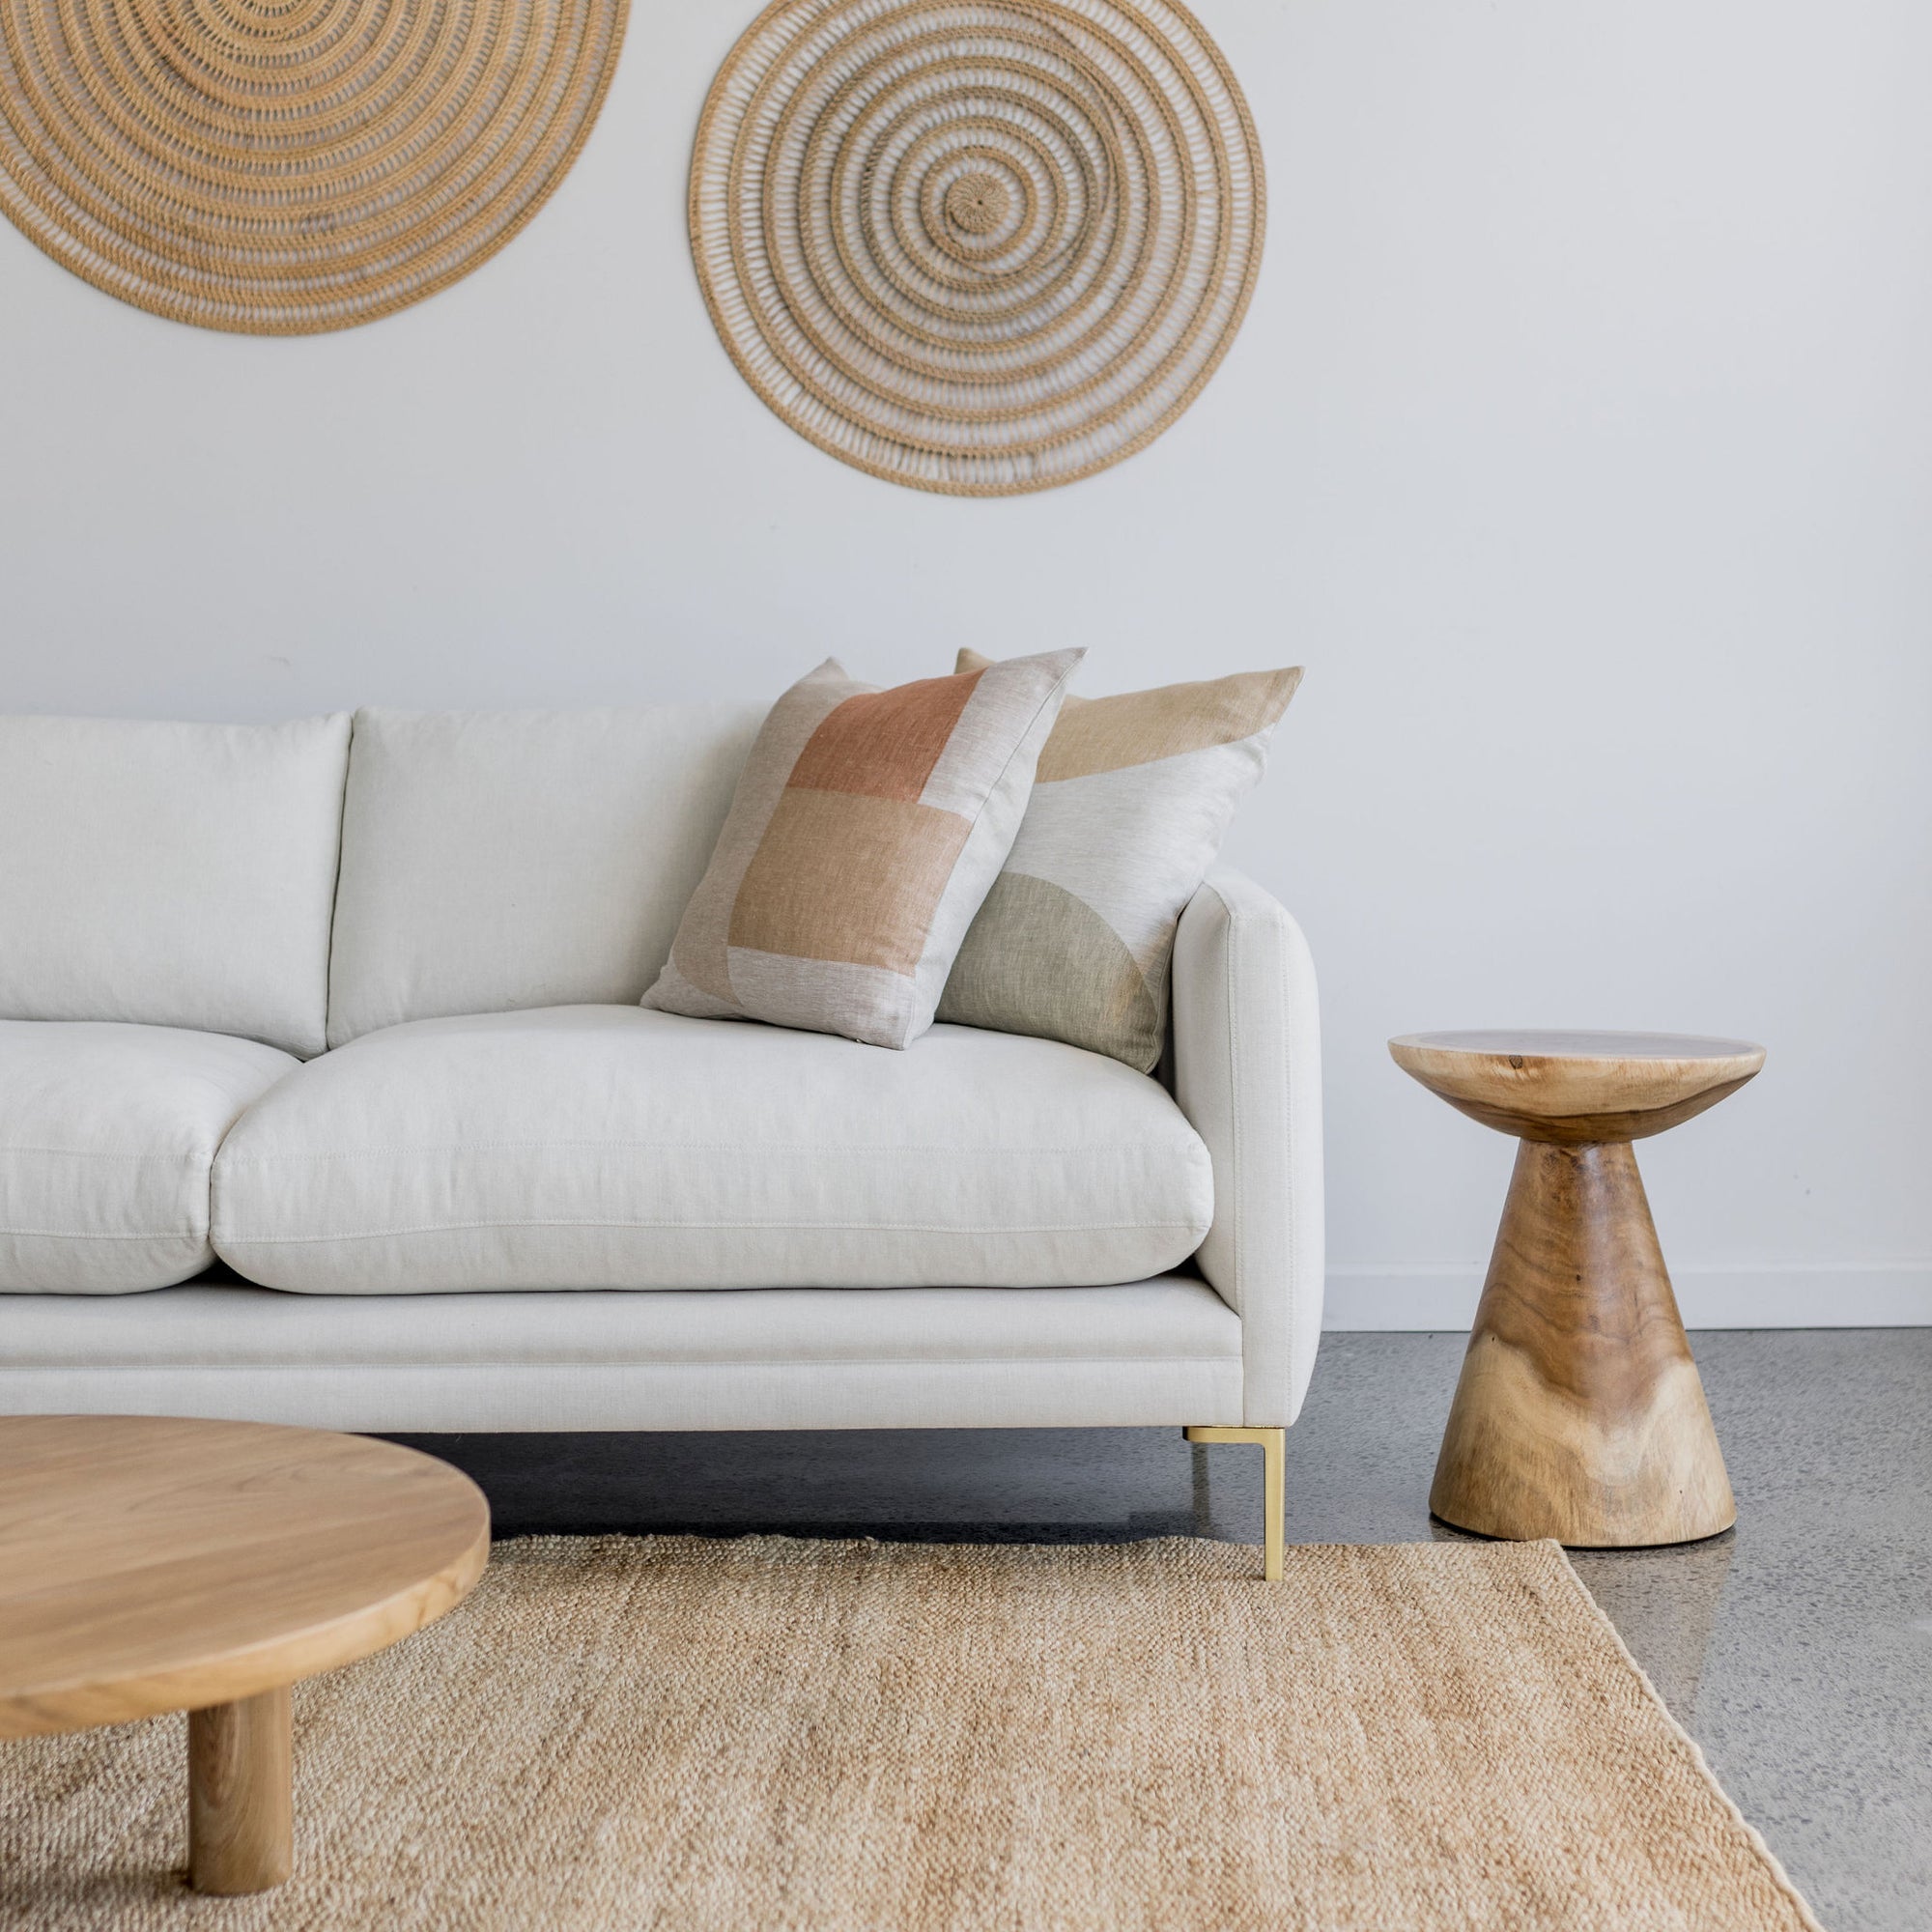 white nz made sofa and a natural suar wood side table corcovado furniture store new zealand